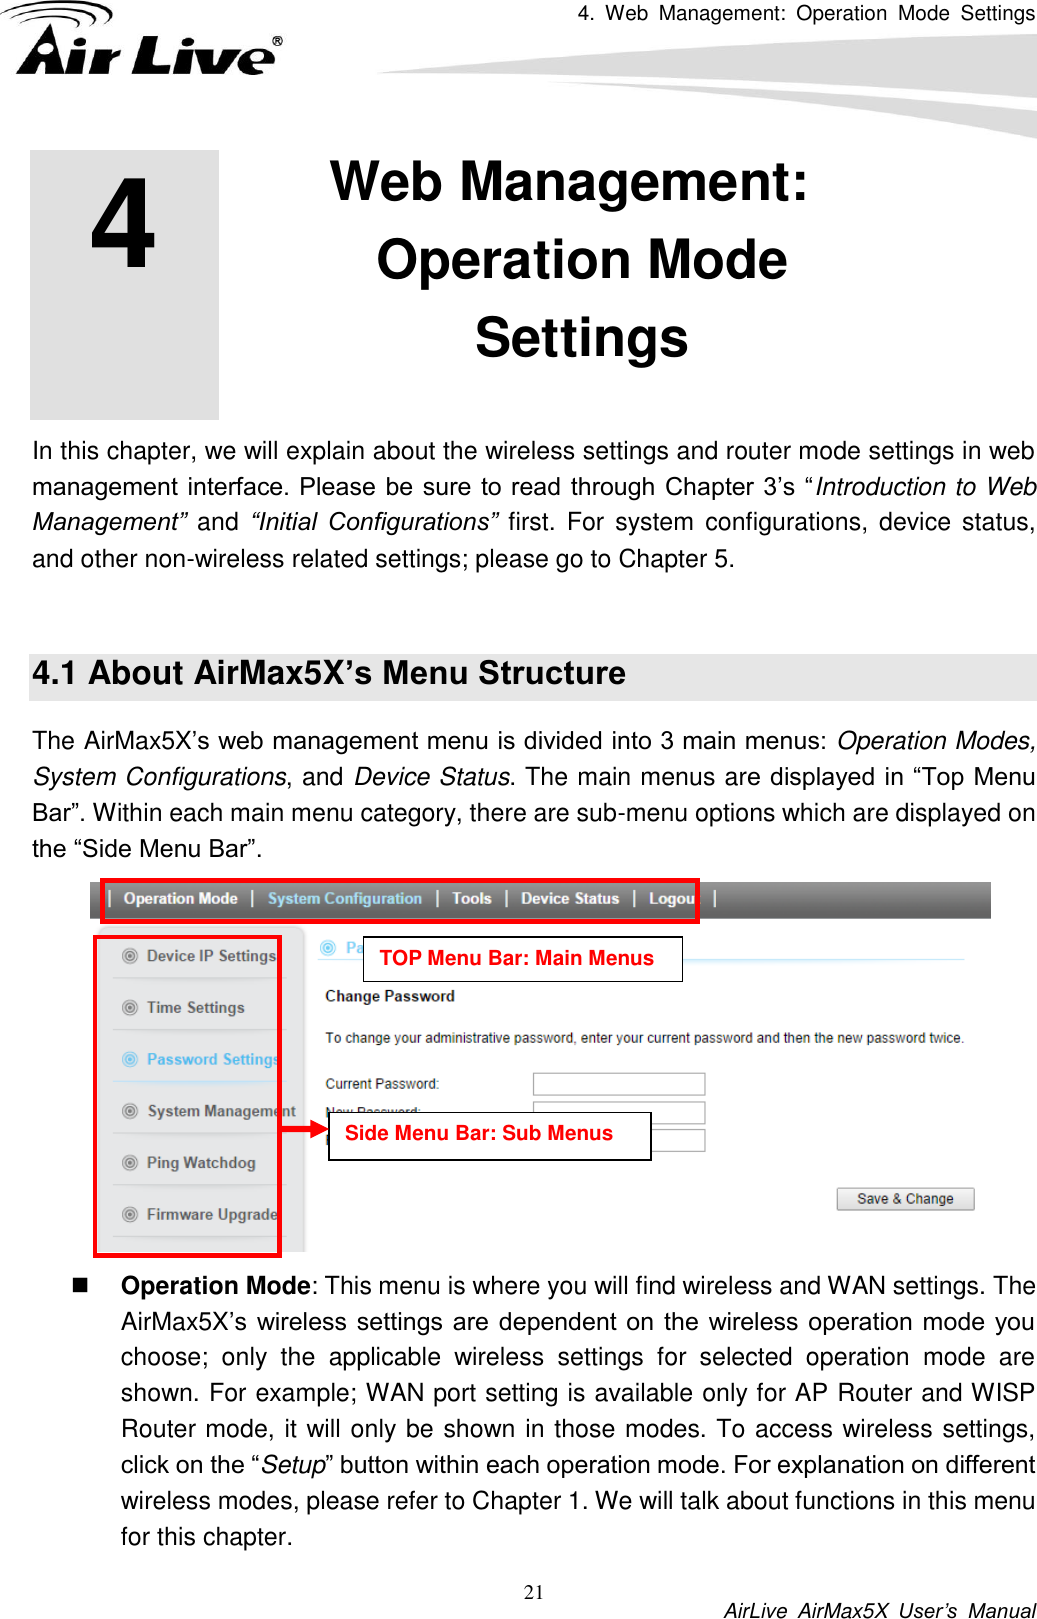 4.  Web  Management:  Operation  Mode  Settings           AirLive  AirMax5X  User’s  Manual 21         In this chapter, we will explain about the wireless settings and router mode settings in web management interface. Please  be sure  to read  through Chapter 3’s “Introduction to Web Management”  and “Initial  Configurations”  first.  For system  configurations,  device  status, and other non-wireless related settings; please go to Chapter 5.    4.1 About AirMax5X’s Menu Structure The AirMax5X’s web management menu is divided into 3 main menus: Operation Modes, System Configurations, and Device Status. The main menus are displayed in “Top Menu Bar”. Within each main menu category, there are sub-menu options which are displayed on the “Side Menu Bar”.     Operation Mode: This menu is where you will find wireless and WAN settings. The AirMax5X’s wireless  settings are  dependent on  the wireless operation mode you choose;  only  the  applicable  wireless  settings  for  selected  operation  mode  are shown. For example; WAN port setting is available only for AP Router and WISP Router mode, it will only be shown in those modes. To access wireless settings, click on the “Setup” button within each operation mode. For explanation on different wireless modes, please refer to Chapter 1. We will talk about functions in this menu for this chapter. 4 4. Web Management: Operation Mode Settings  TOP Menu Bar: Main Menus Side Menu Bar: Sub Menus 